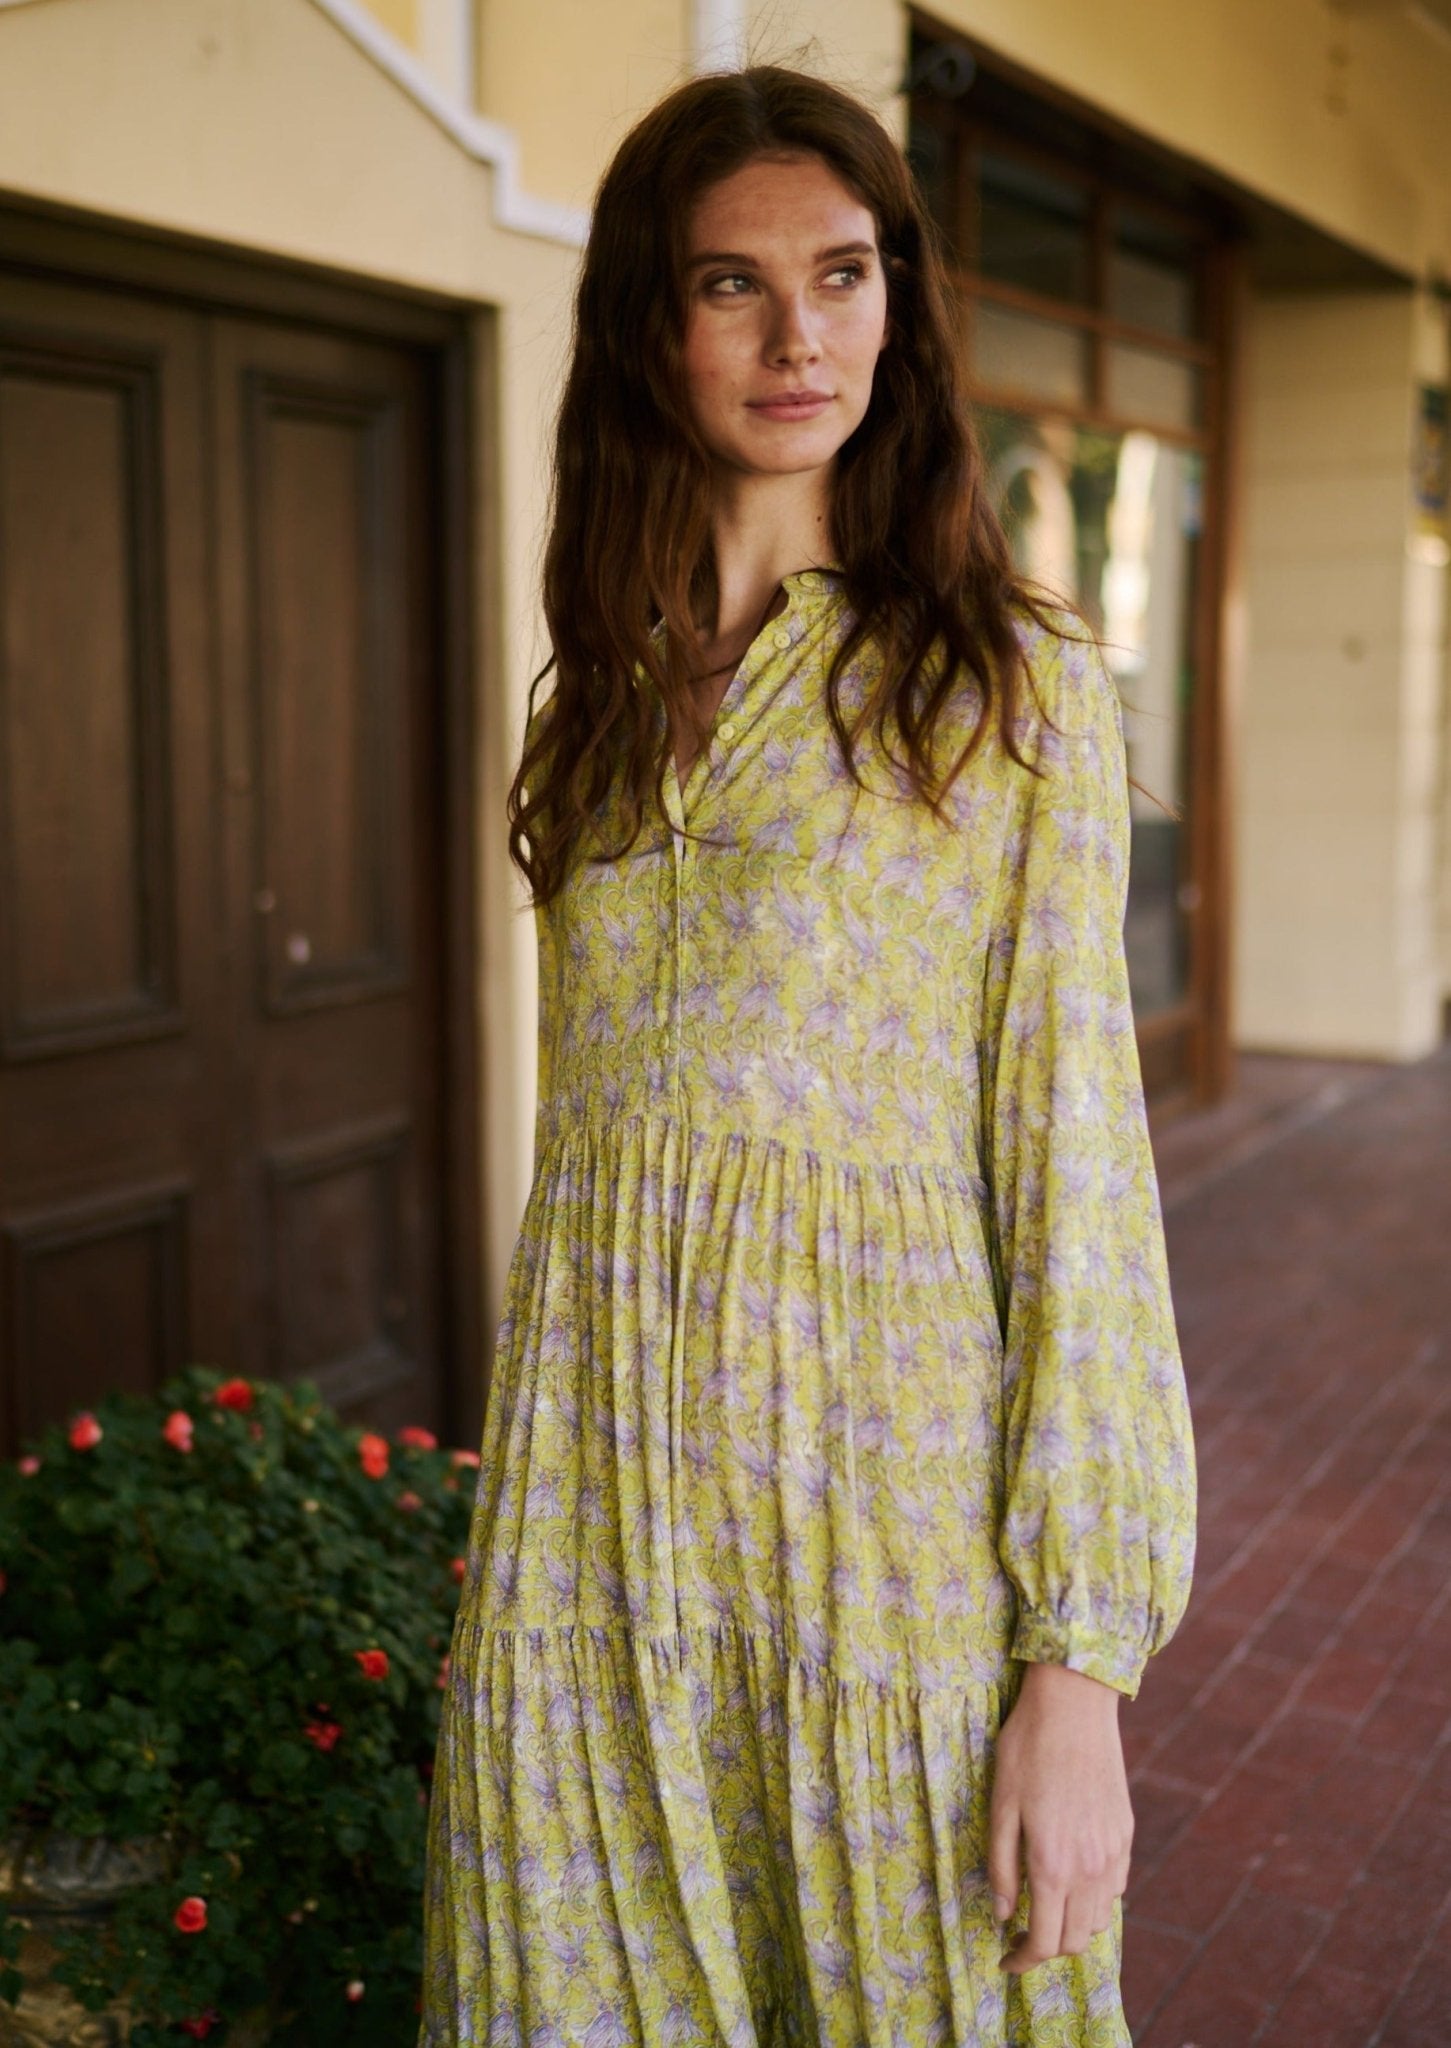 Bohemian Shirt Dress in Yellow with Paisley Print - DRESSES Tribute Store